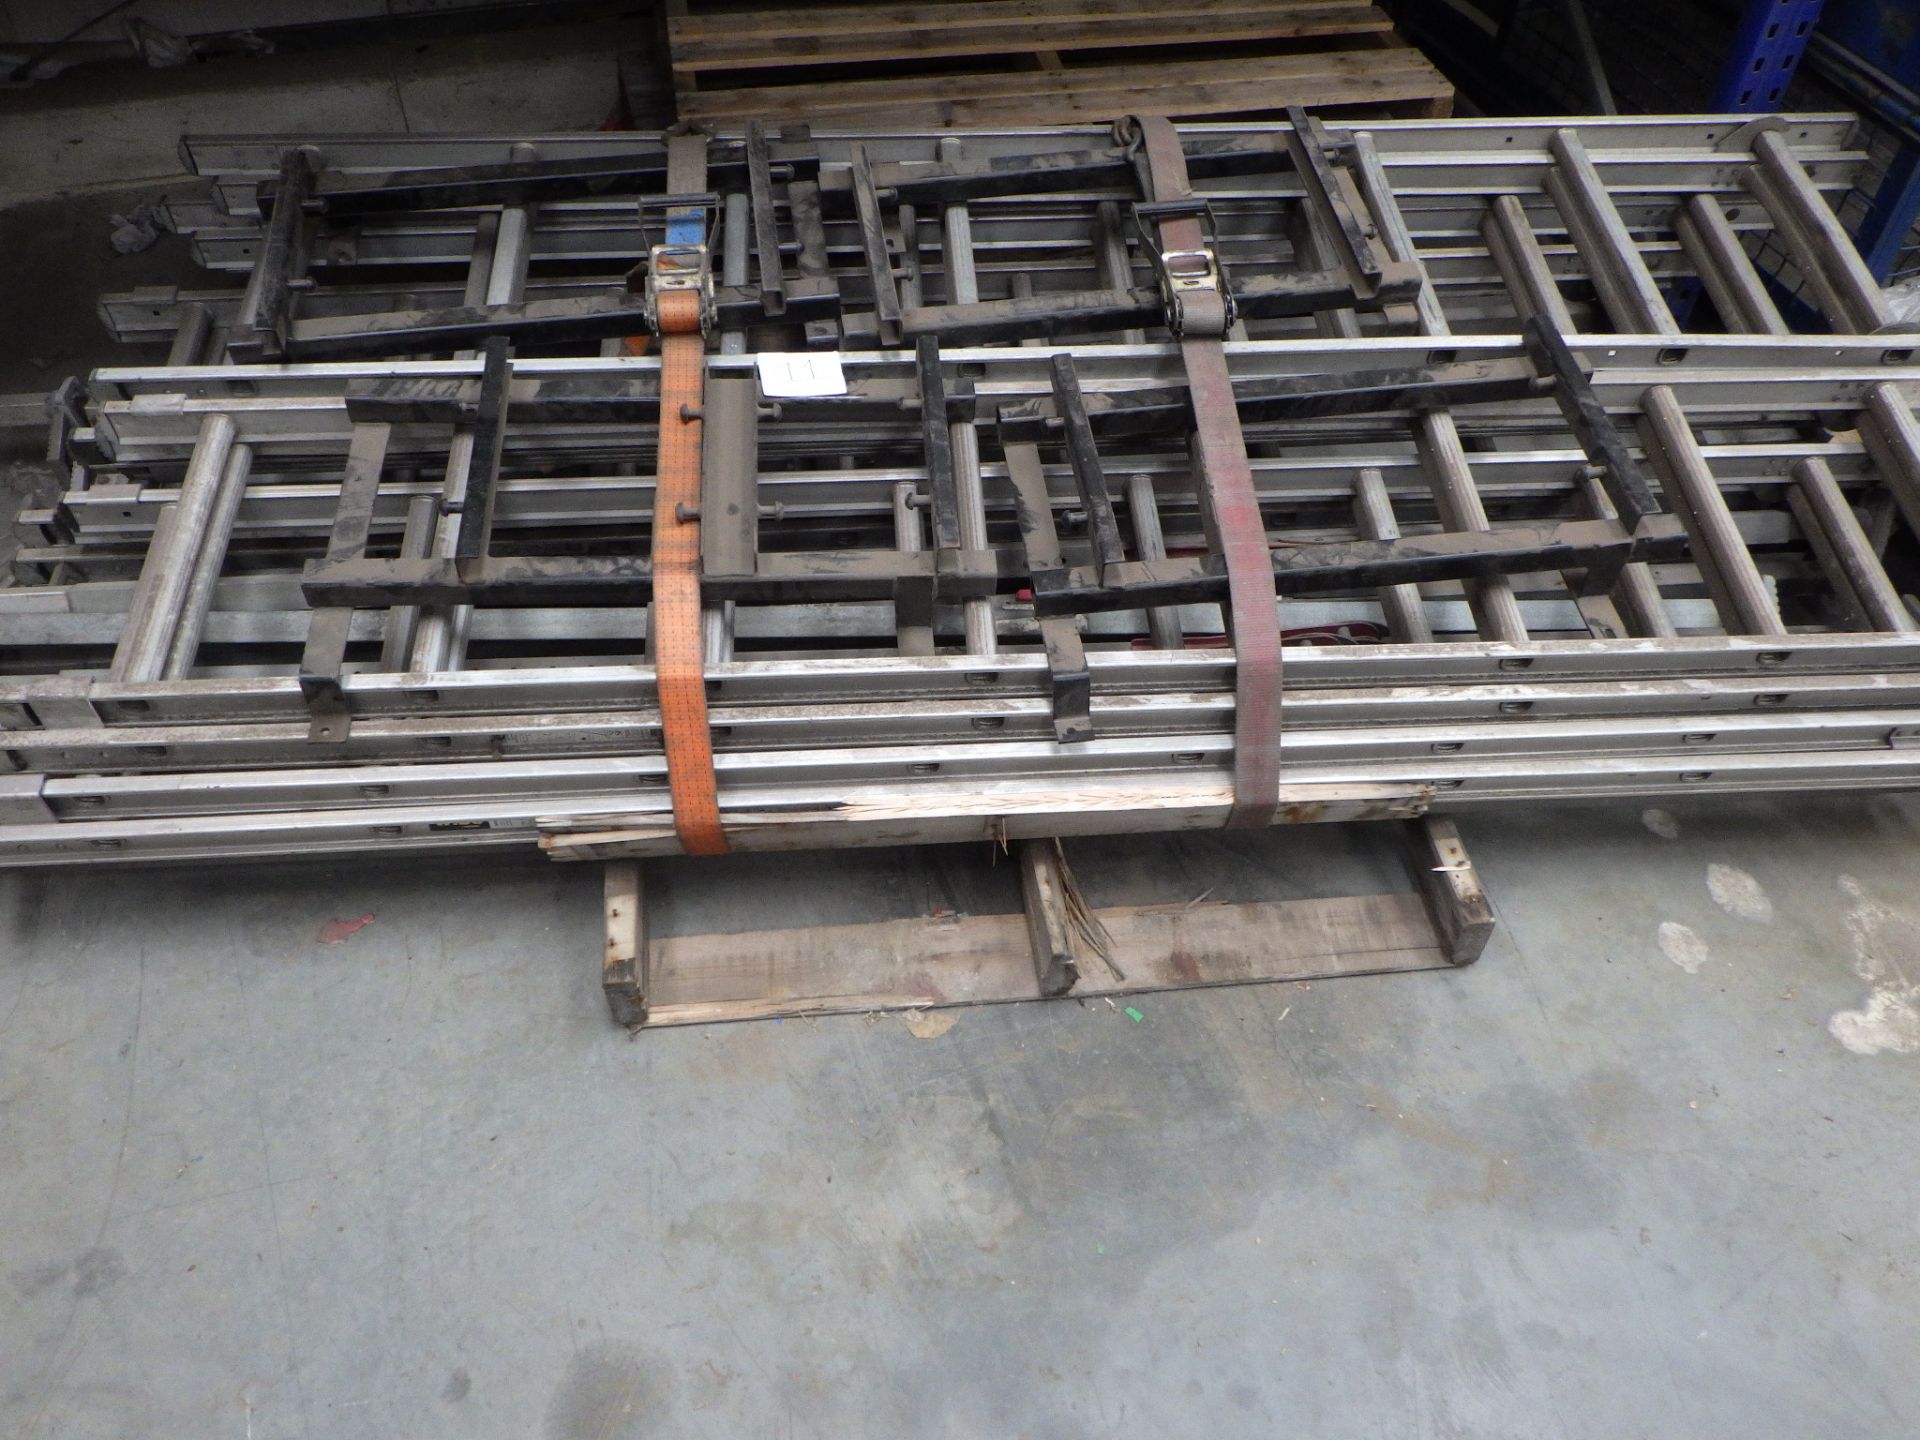 VOLVO CAB LADDERS AND LOAD RESTRAINT BARS